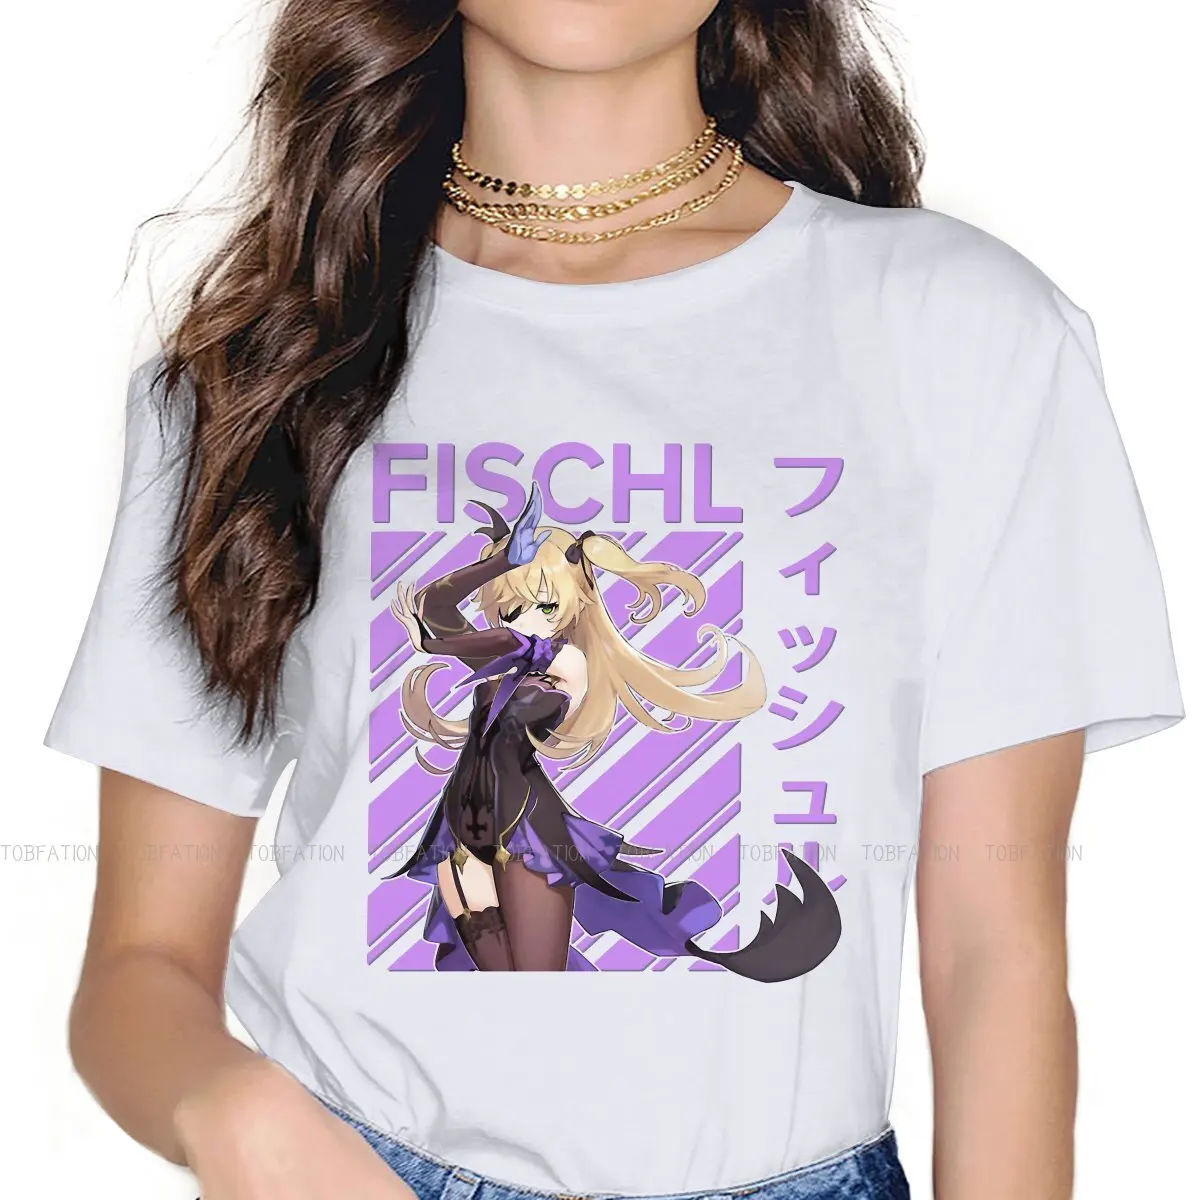 Fischl TShirt For Girls Genshin Impact Game Paimon Childe Tees Style Lady T Shirt 4XL Homme Print Loose